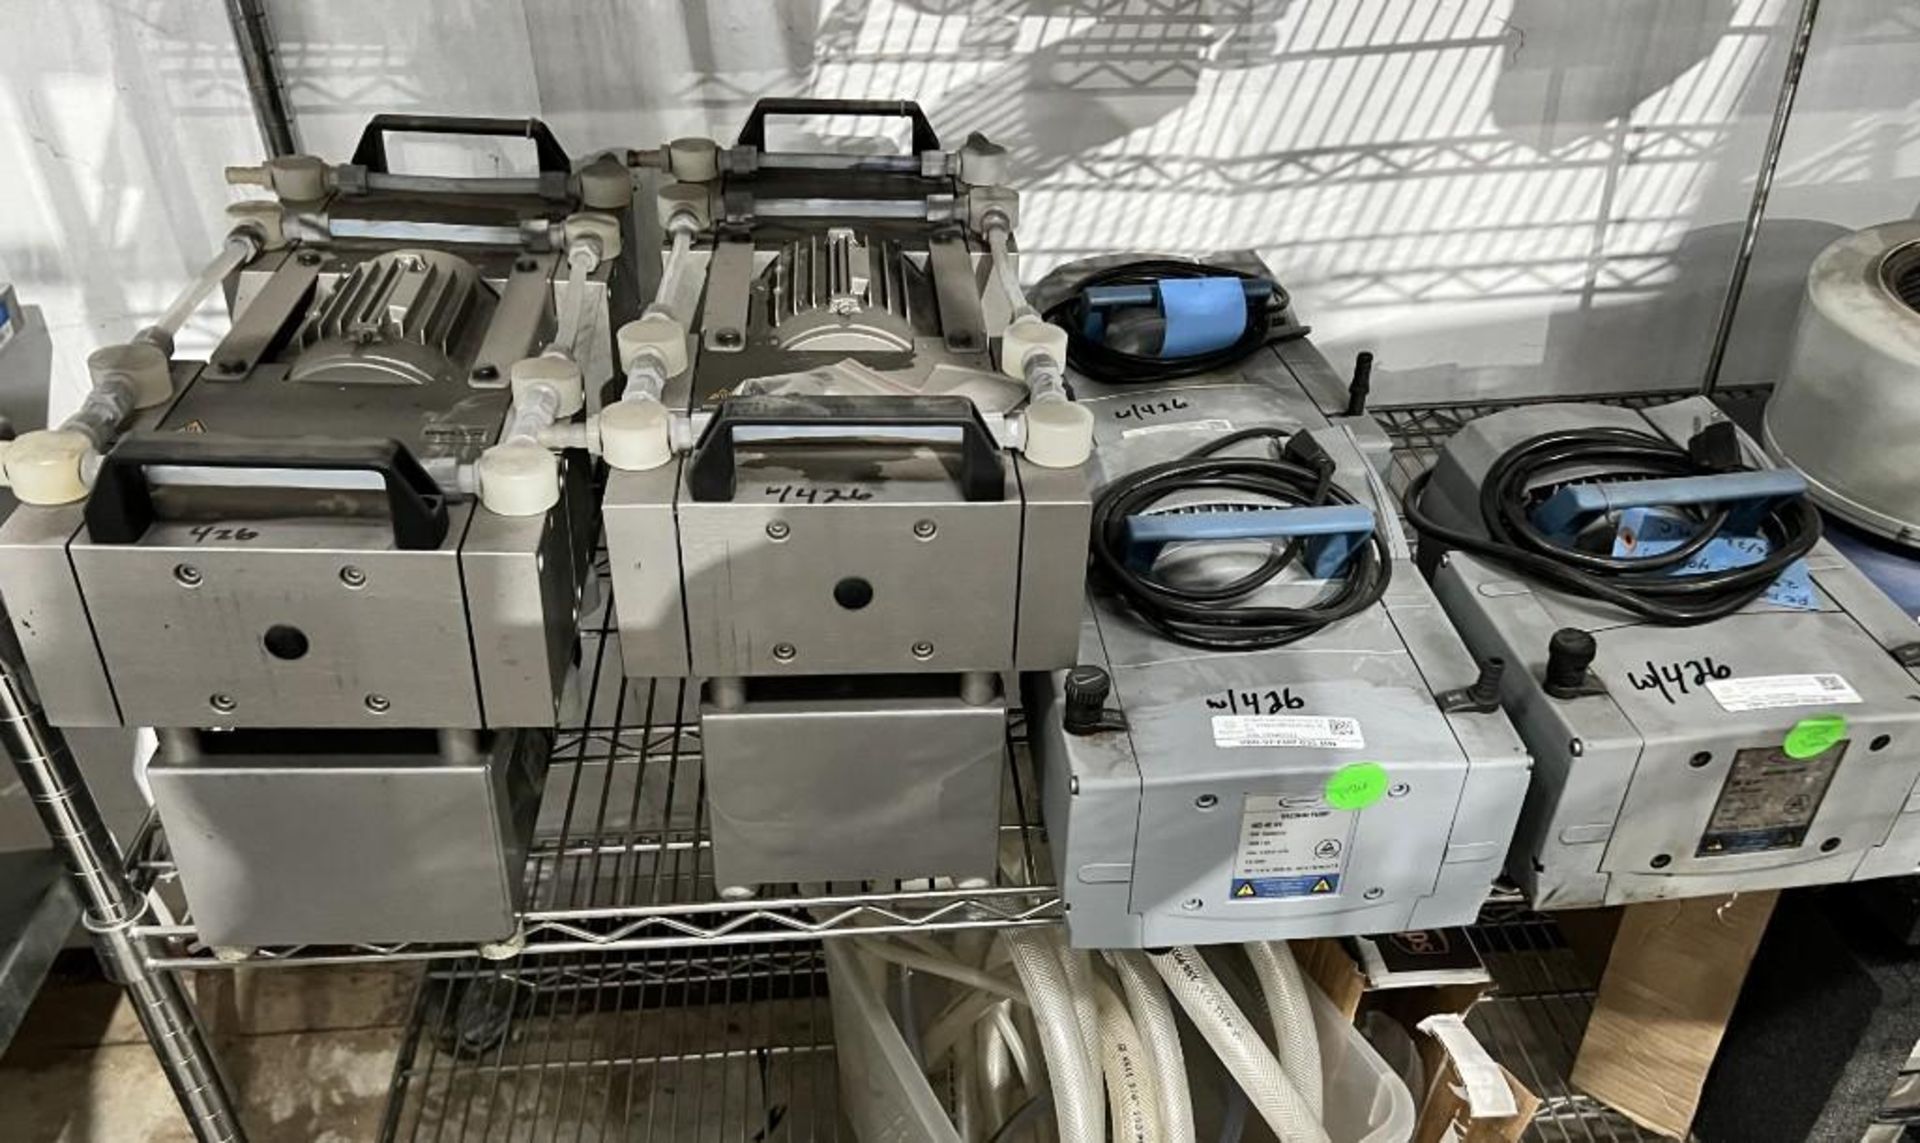 Lot Of (5) Vacuum Pumps. With (3) Vacuubrand model MD-4C-NT, Serial# 103261009, 103462312, 103346605